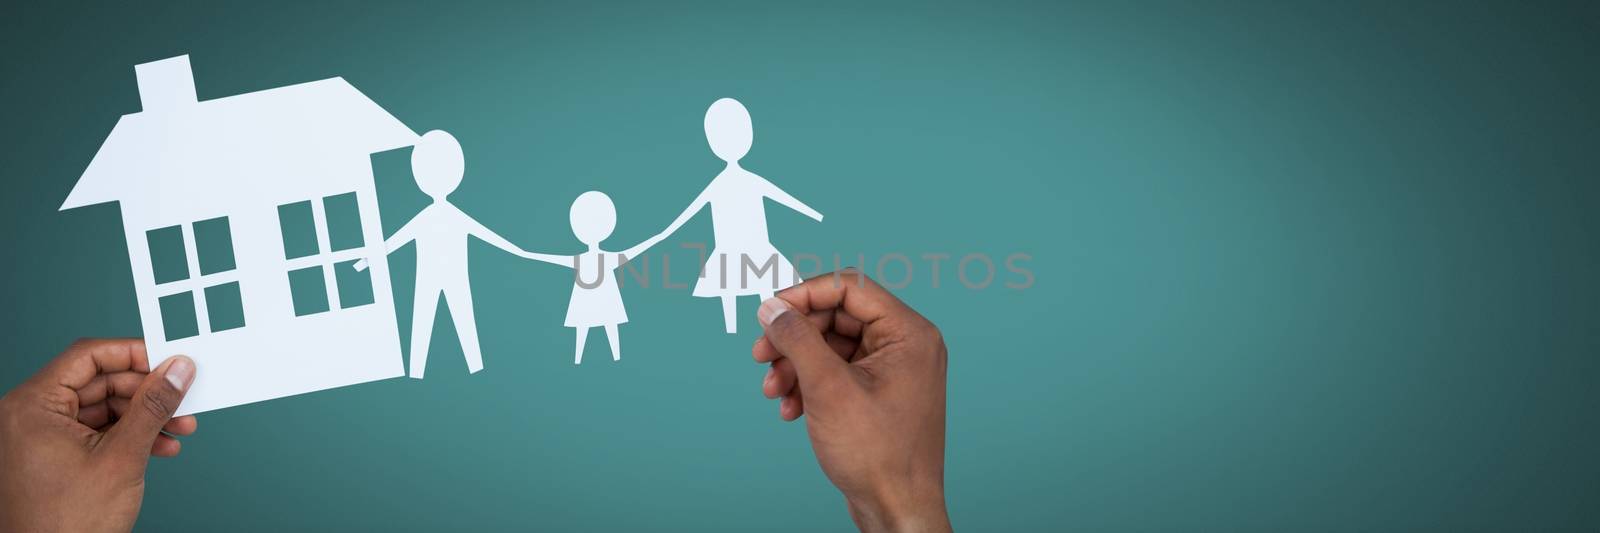 Digital composite of Paper Cut Out family home in hands